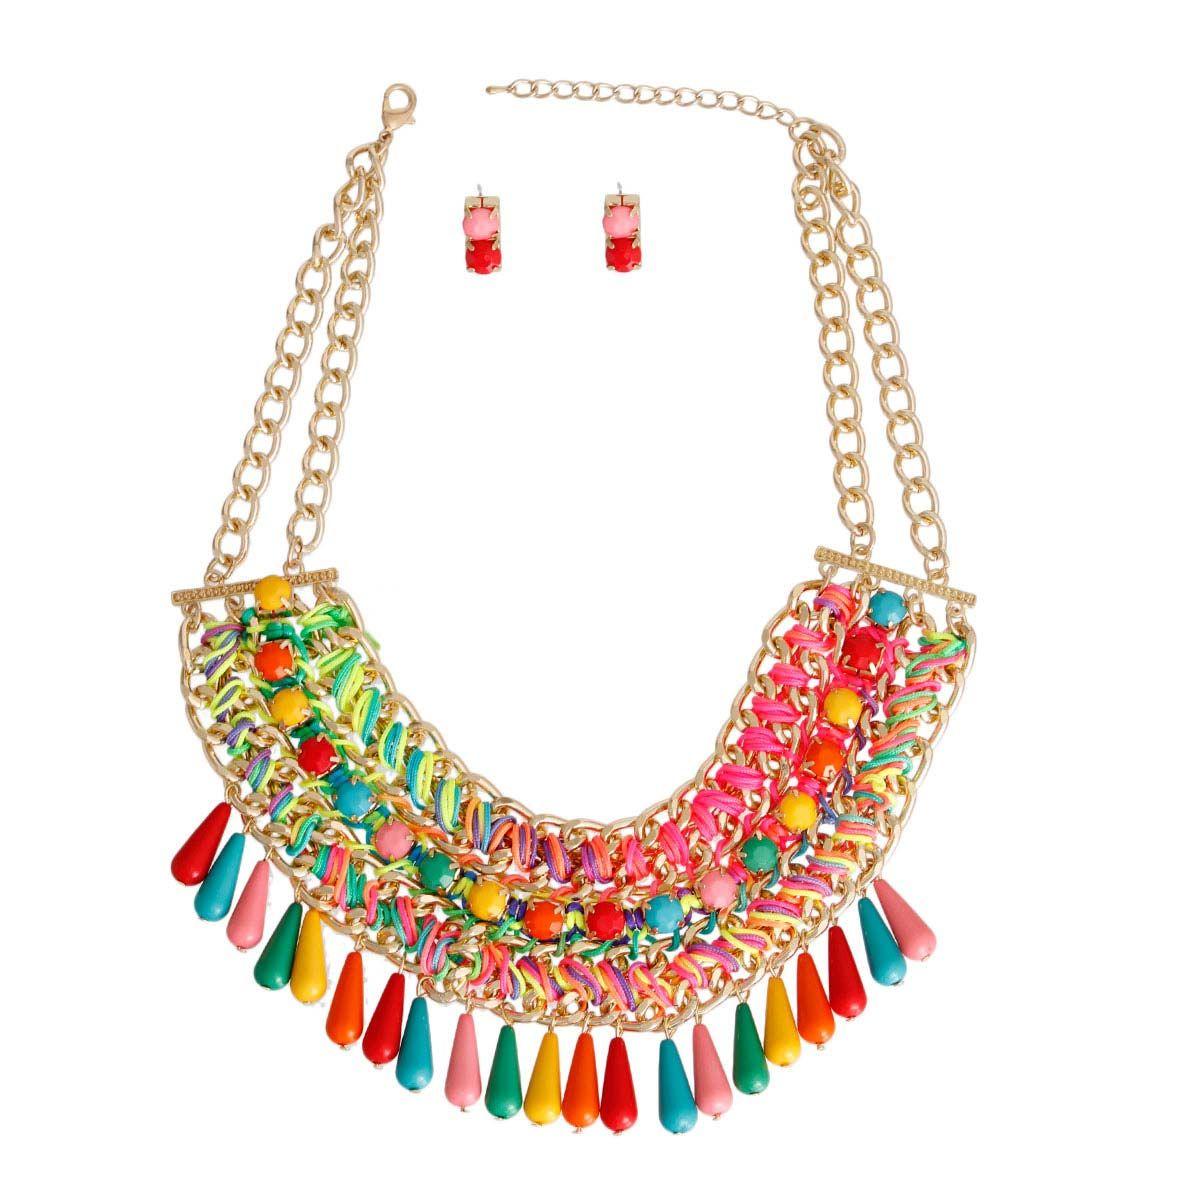 Must-Have Summer Bead Necklace & Earrings Set - Vibrant Colors Await!